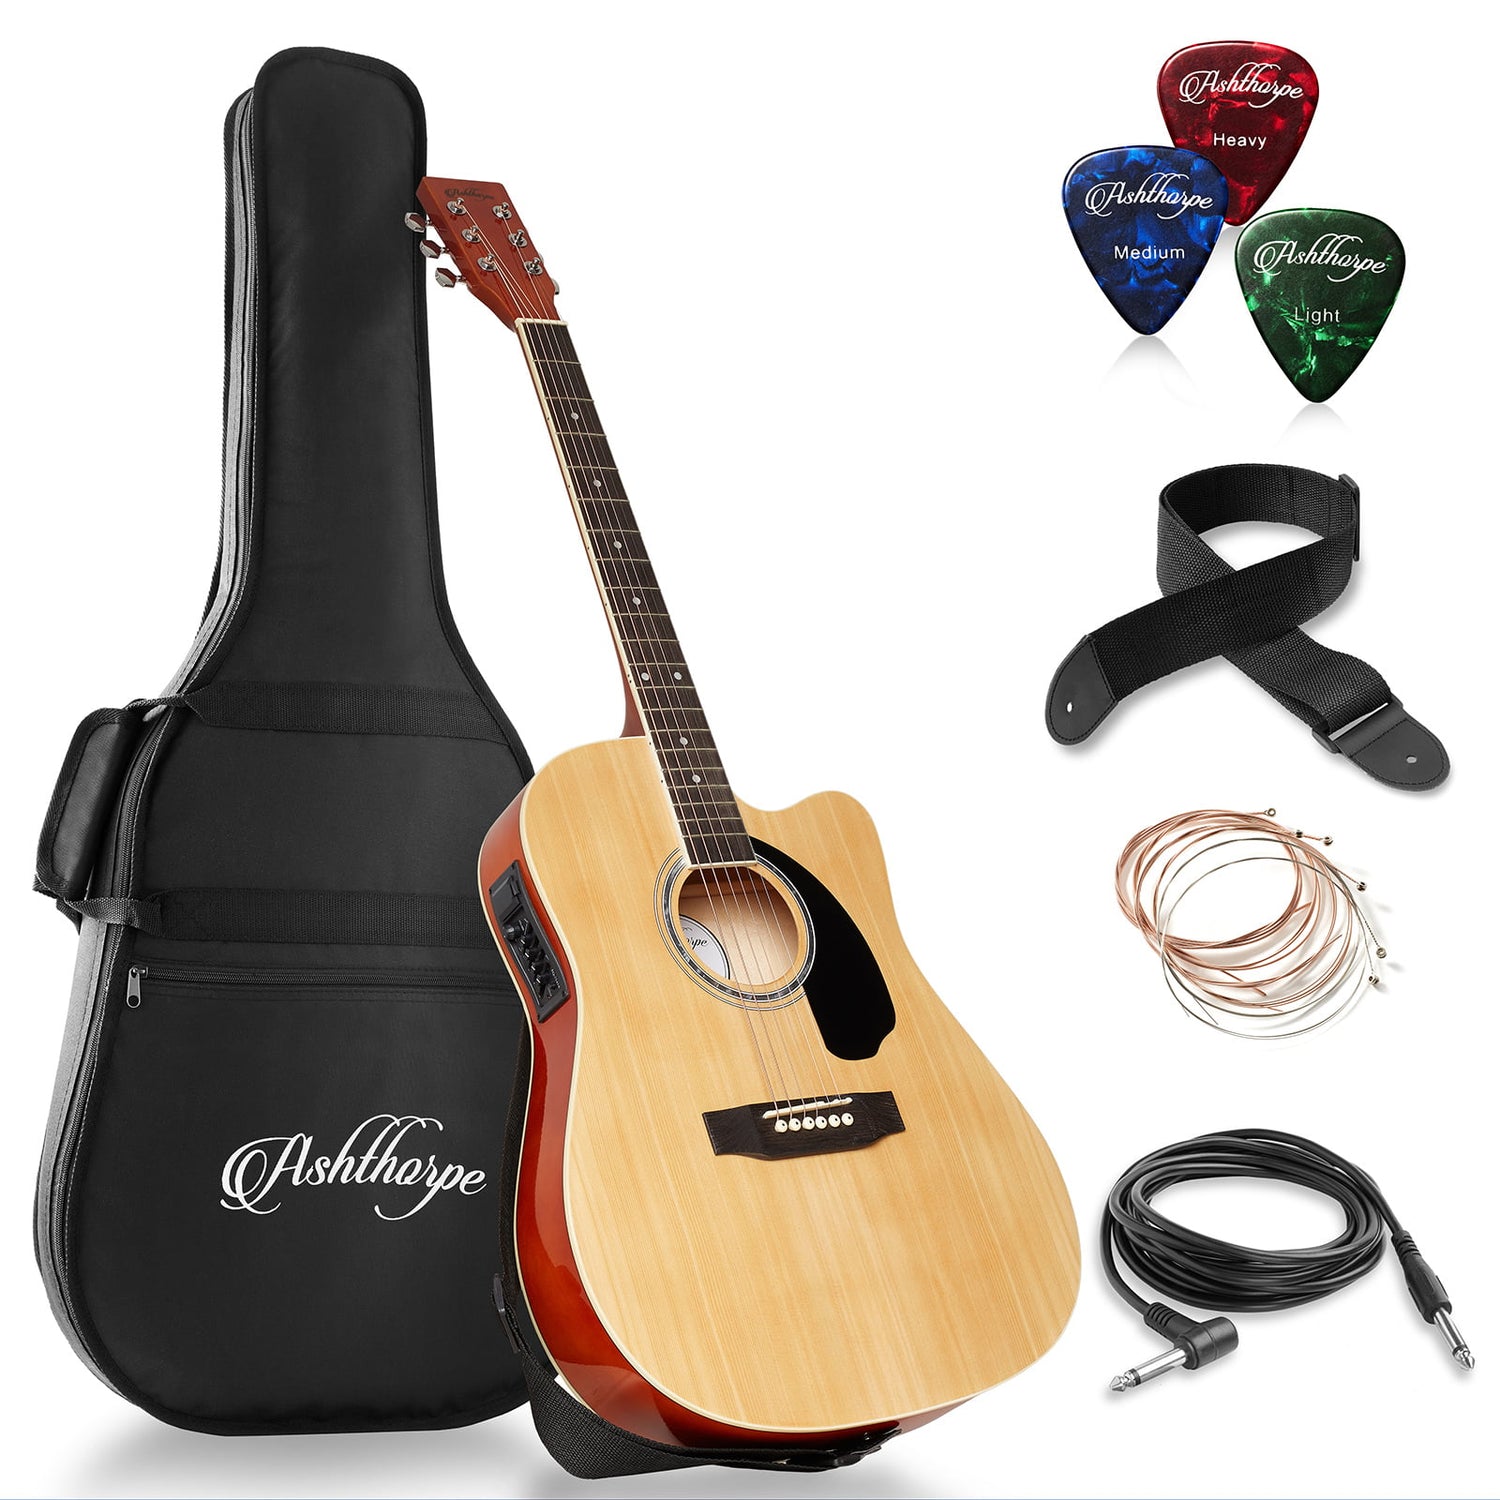 Ashthorpe Full-Size Cutaway Thinline Acoustic-Electric Guitar Package Premium Tonewoods, Blue Sigbeez